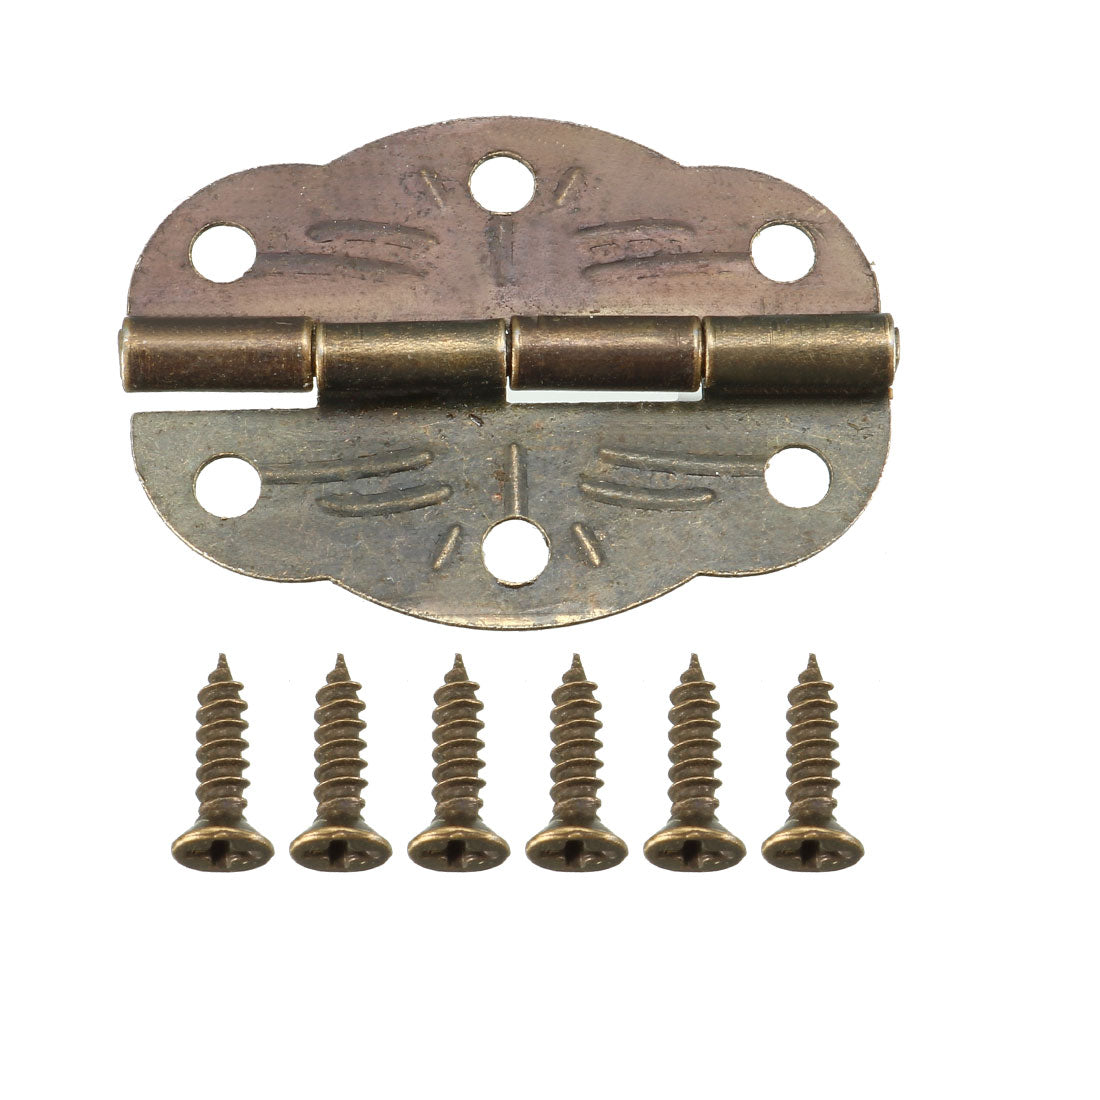 uxcell Uxcell 1.18" Antique Bronze Hinges Retro Mini Hinge Replacement with Screws 16pcs